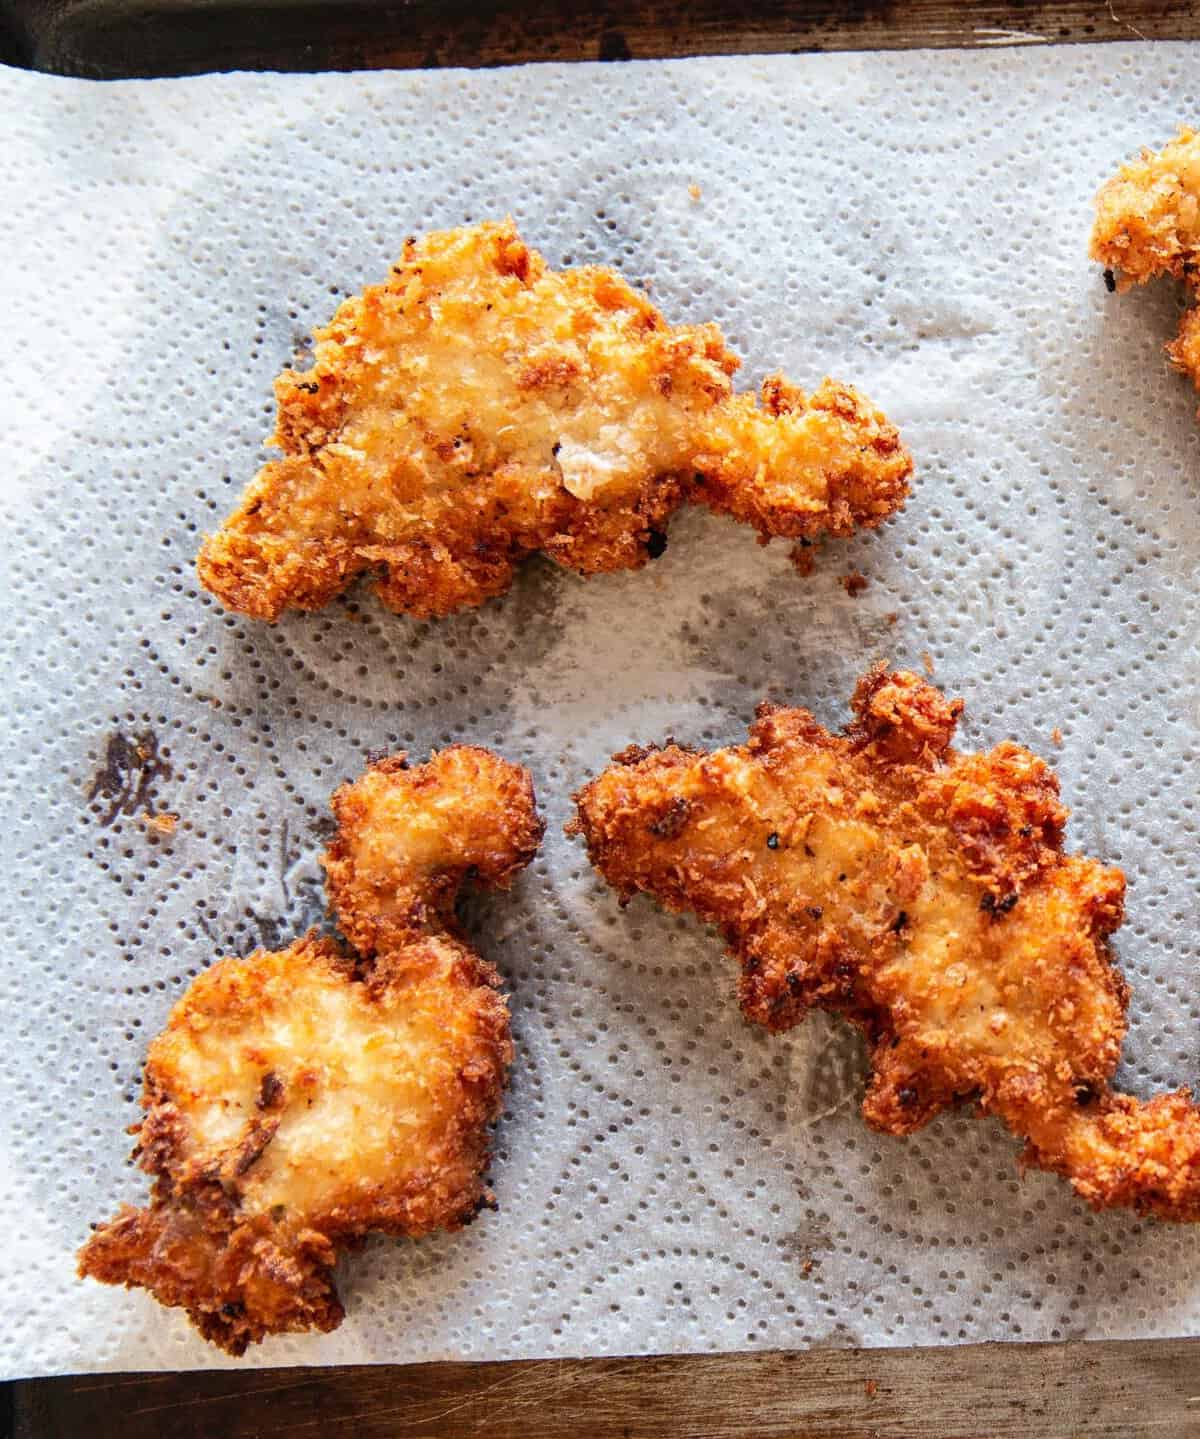  Your kids will be begging to eat their veggies after seeing these adorable Dino Nuggets on their plates!